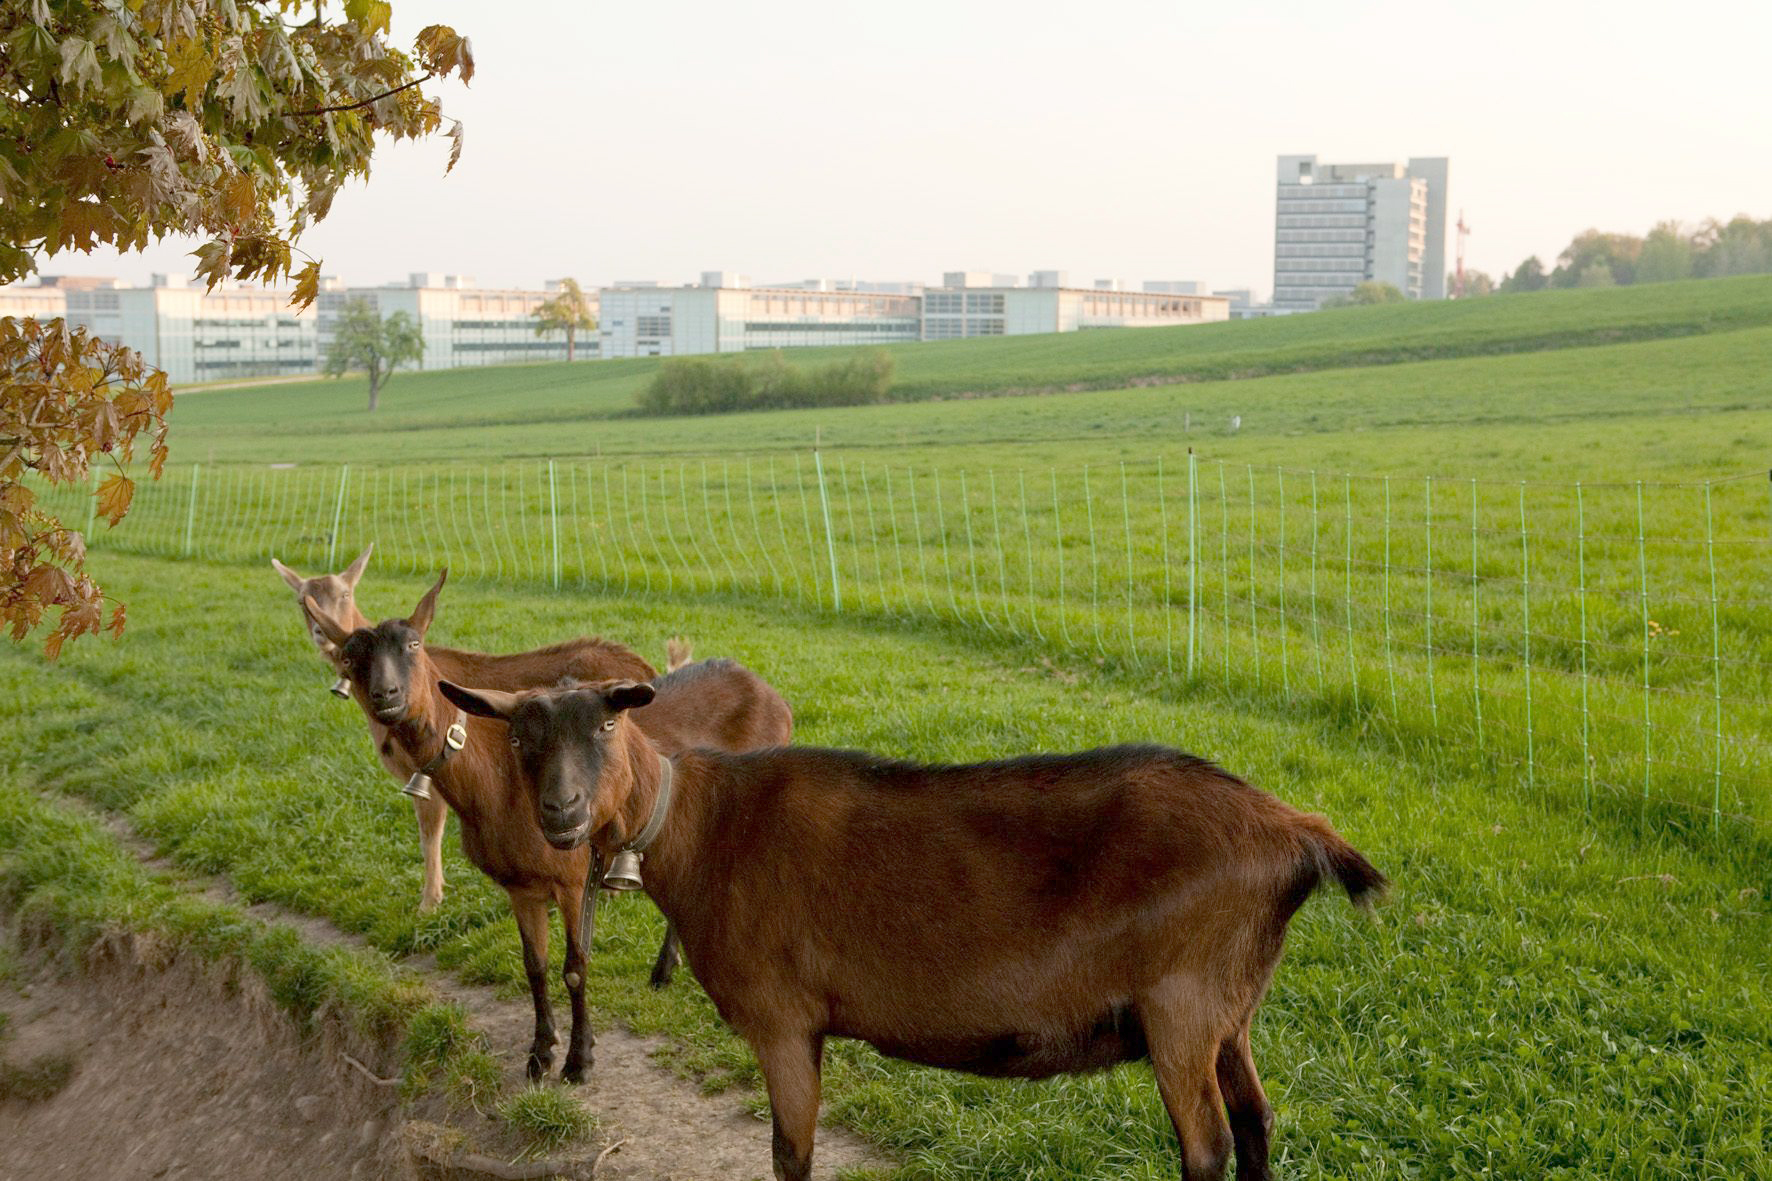 Enlarged view: Goats in front of chemistry building